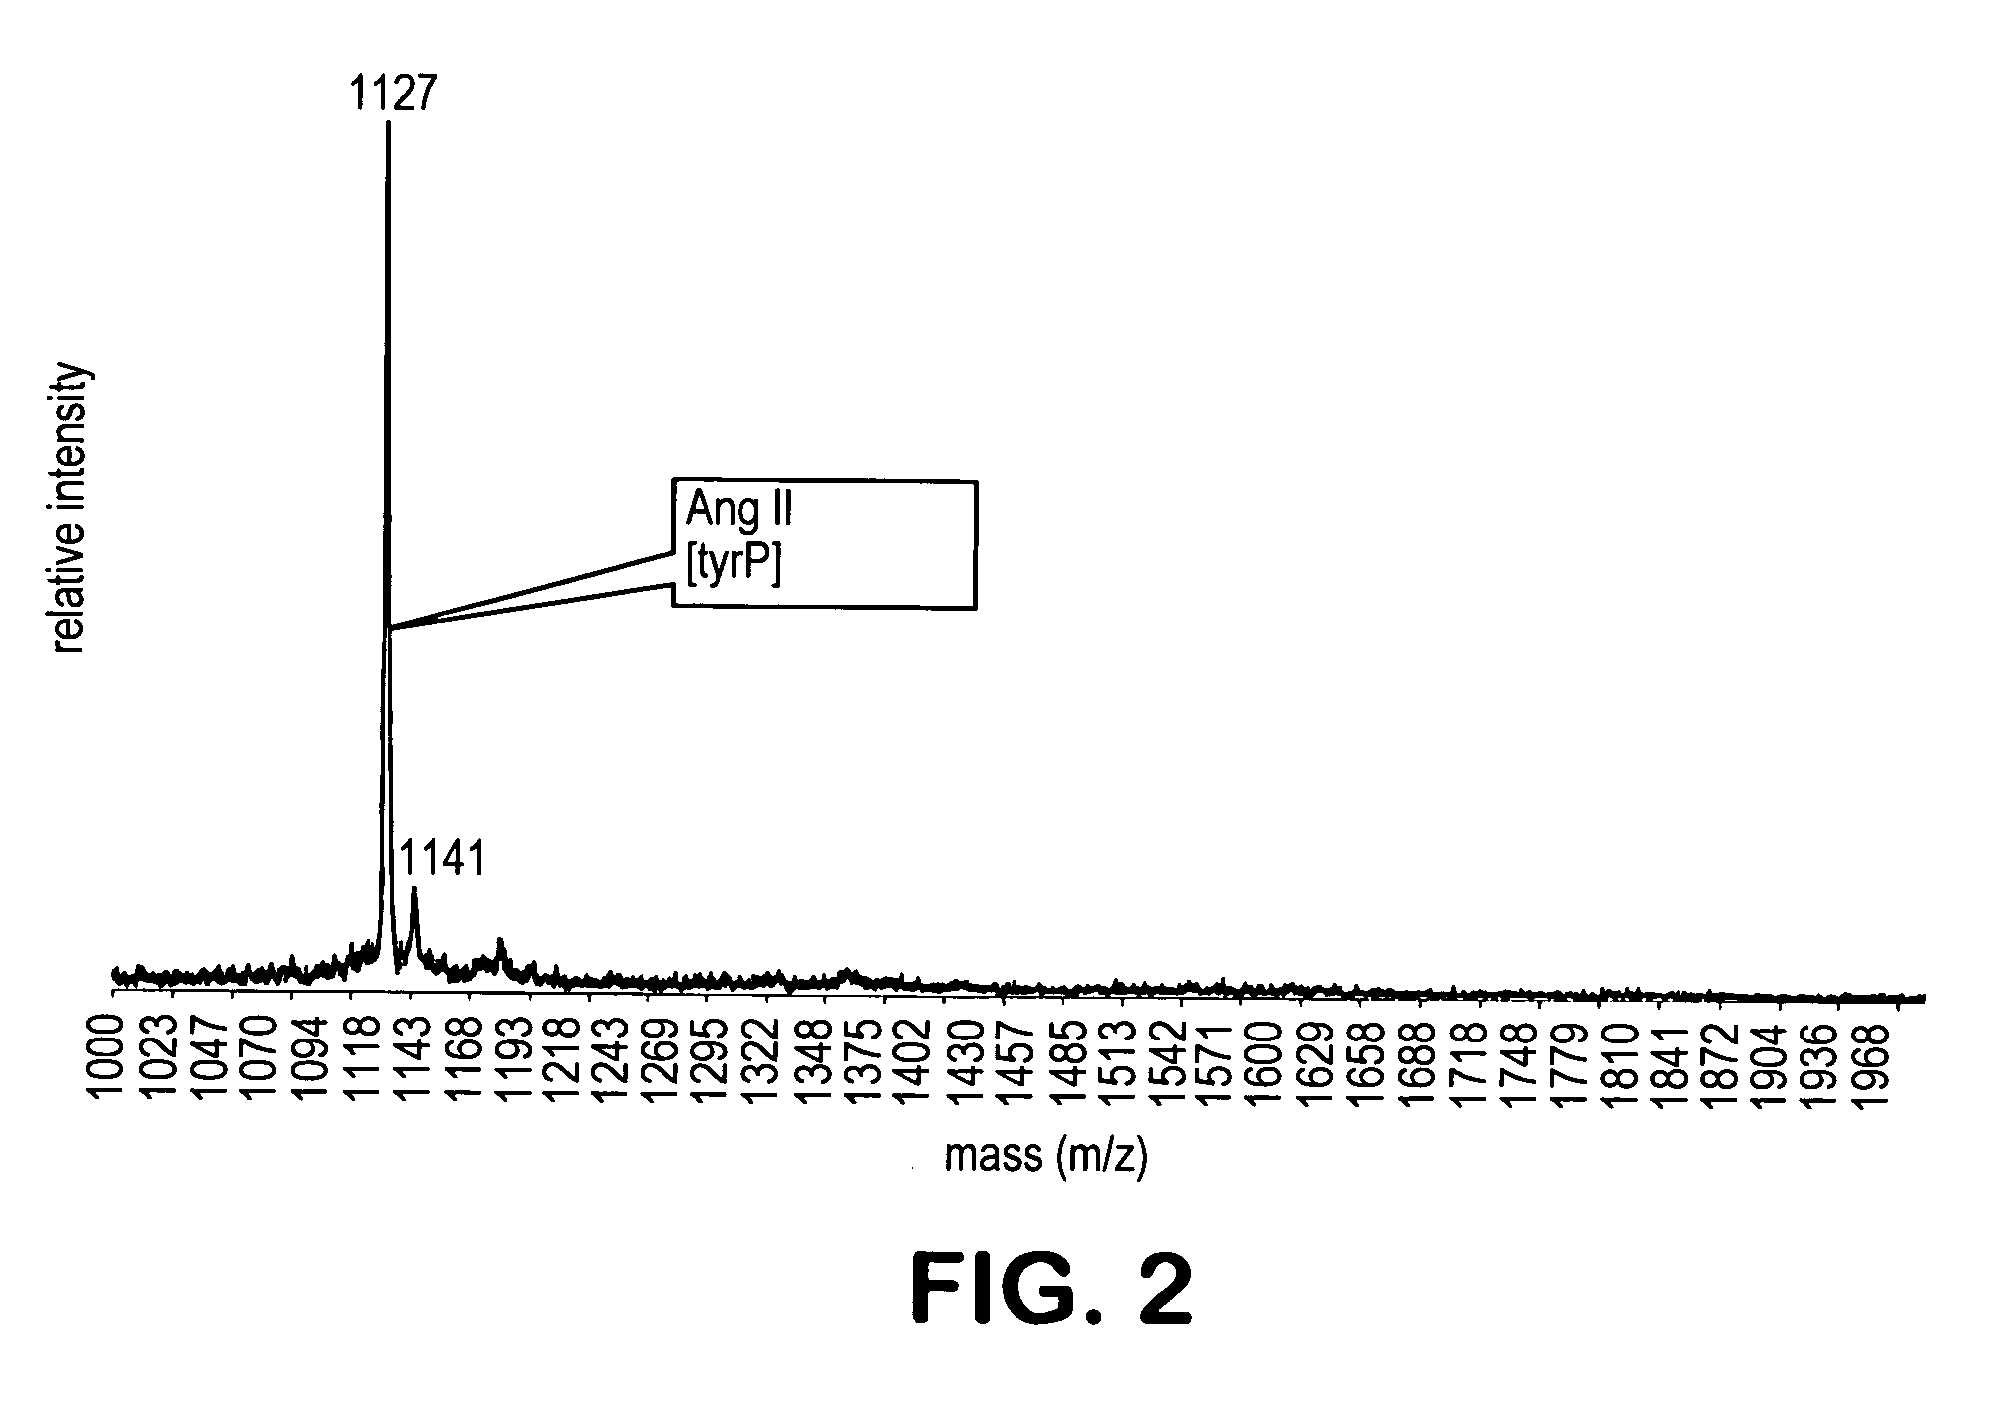 Method for the enrichment and characterization of phosphorylated peptides or proteins